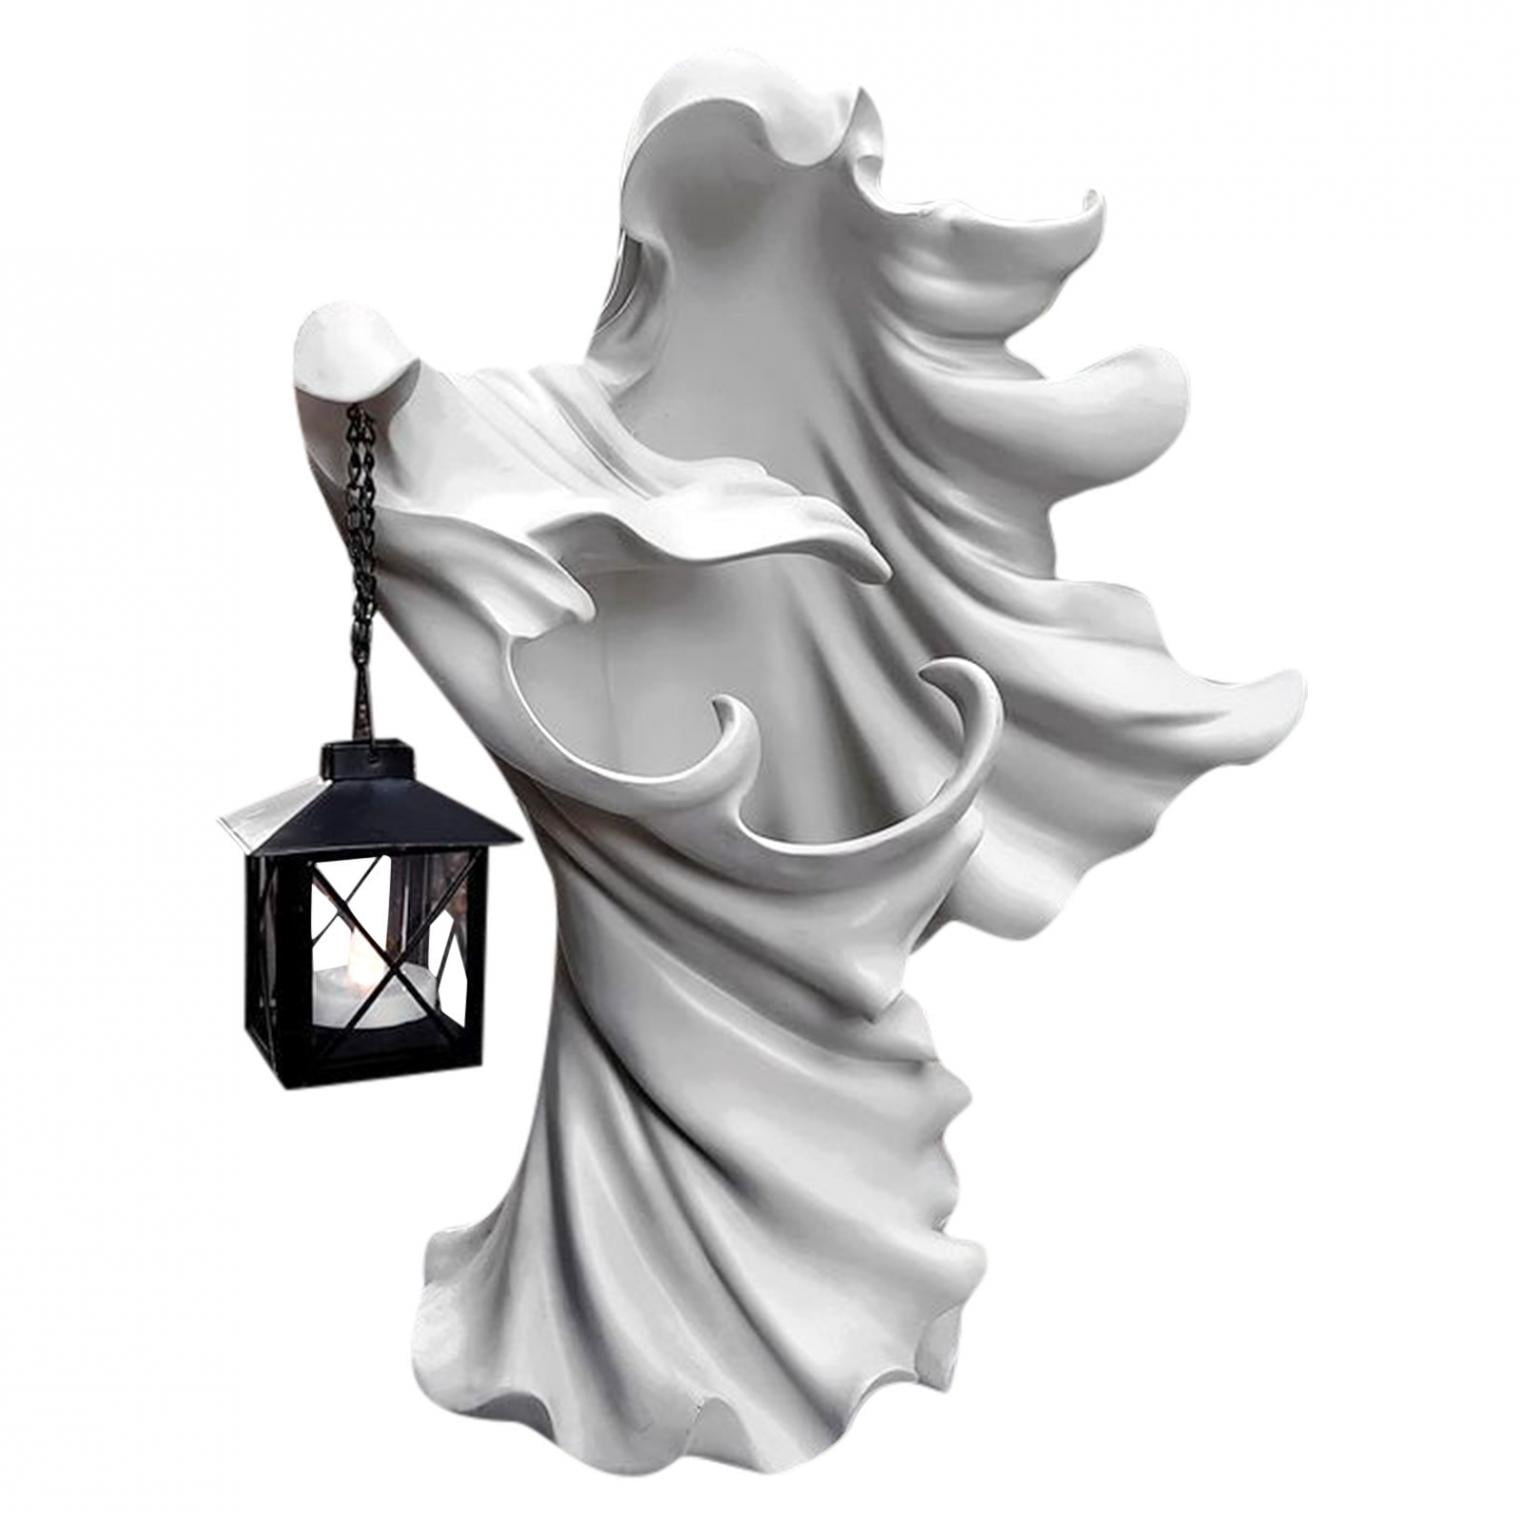 Realistic Resin Ghost Sculpture for Halloween Garden Decoration Witch Decoration Lantern The Ghost Looking for Light White Hells Messenger with Lantern